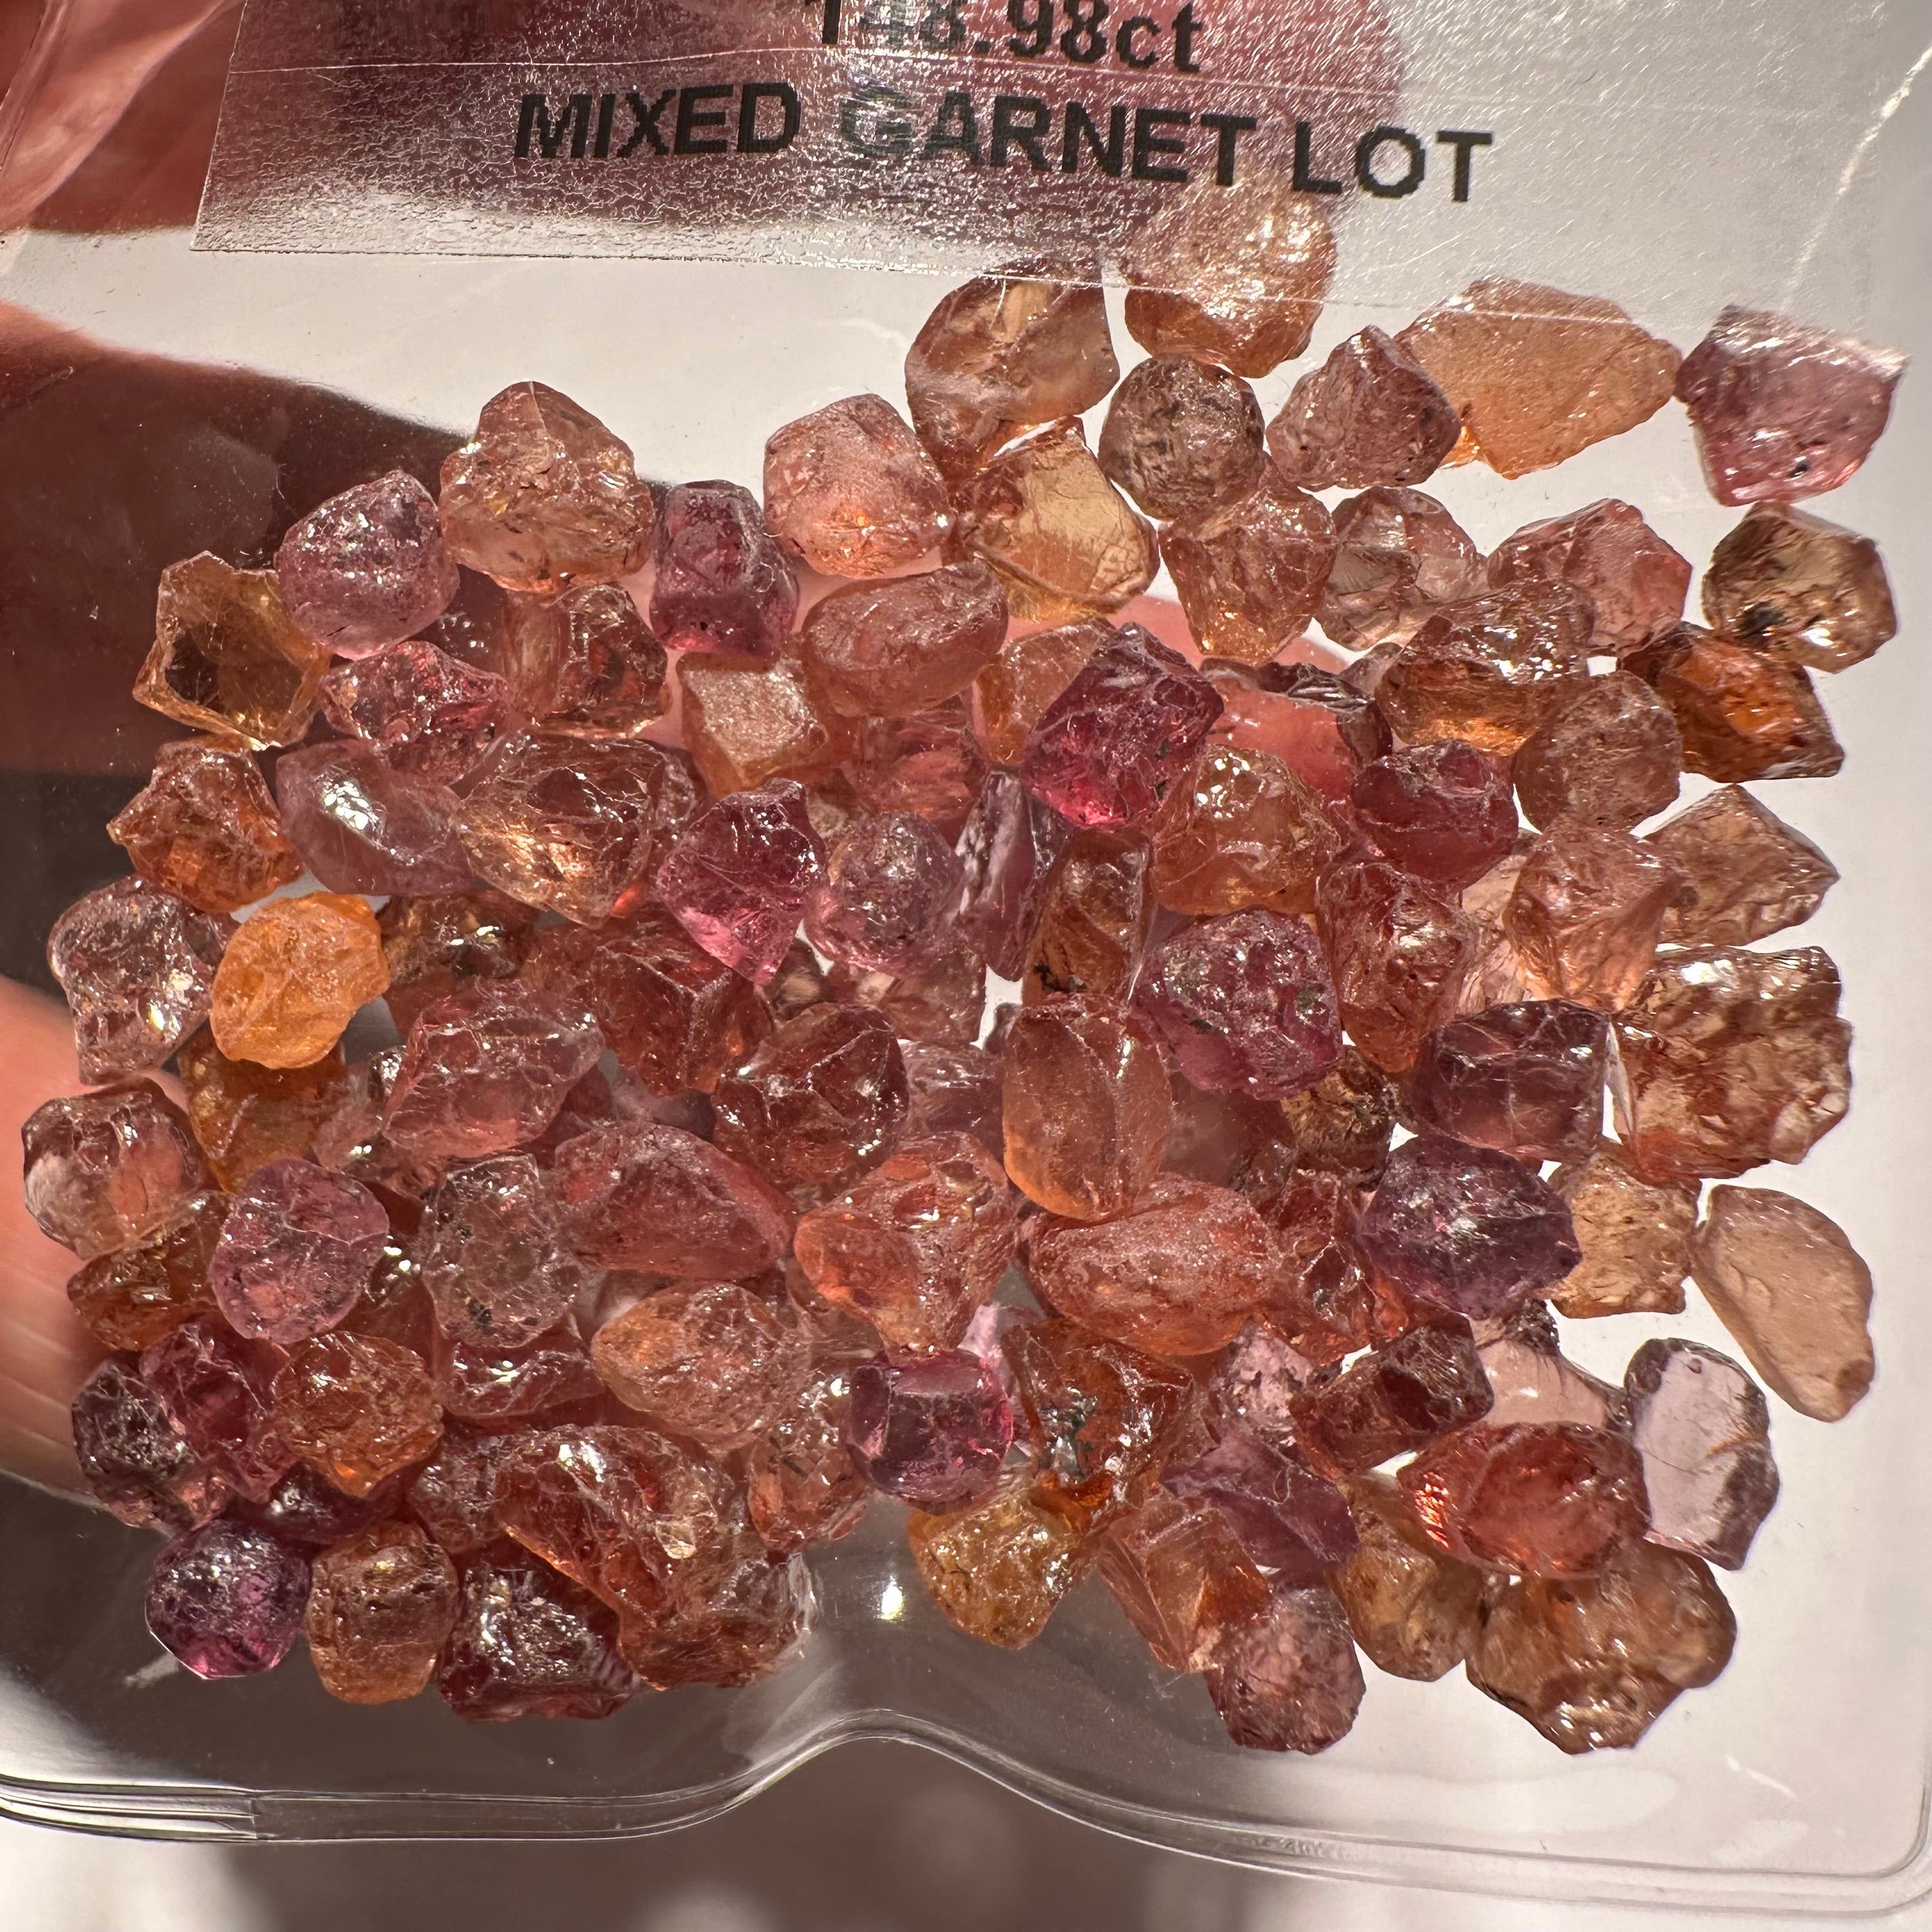 148.98ct Mixed Garnet Lot, Tanzania, Untreated Unheated, slightly included to included